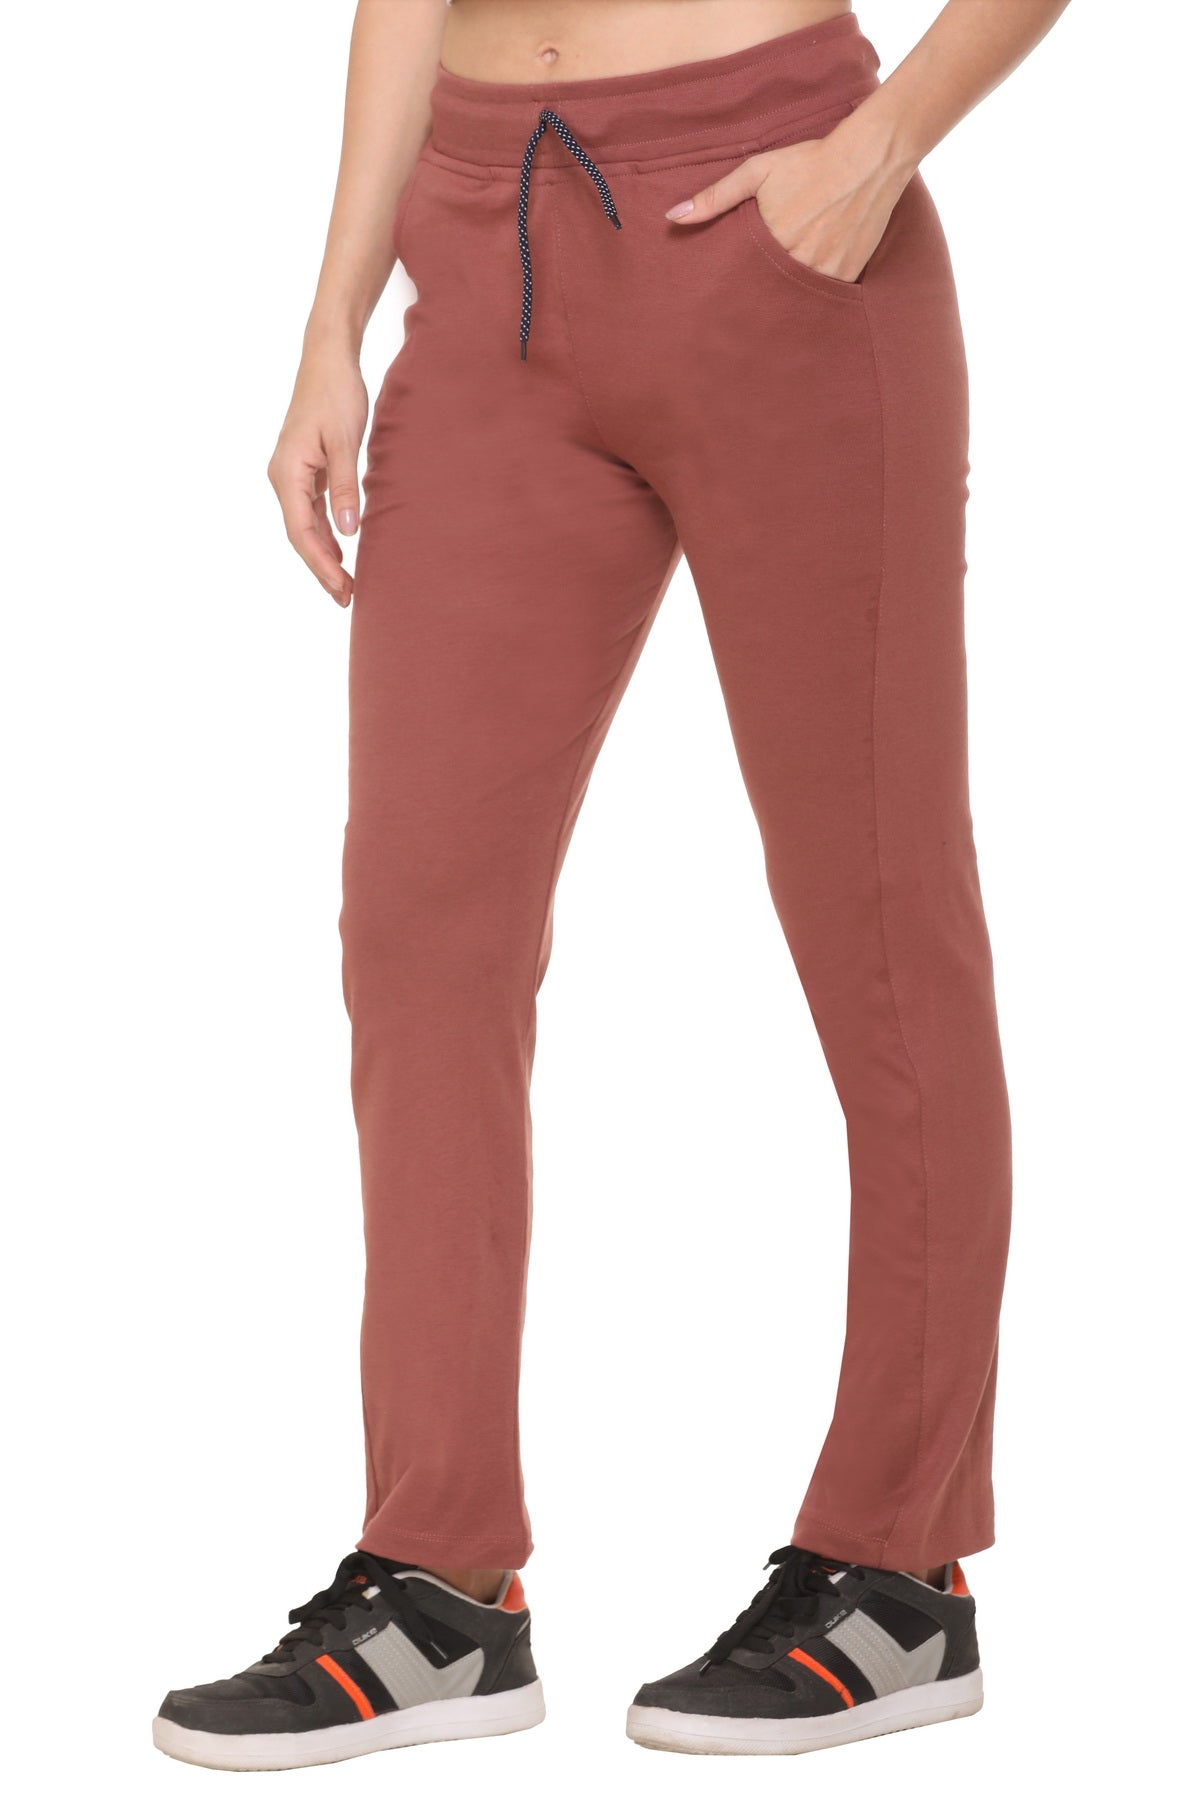 Brown Slim Fit And Double Pocket Daily Wear Plain Cotton Trouser For Ladies  at Best Price in Mumbai | Mansi Collection